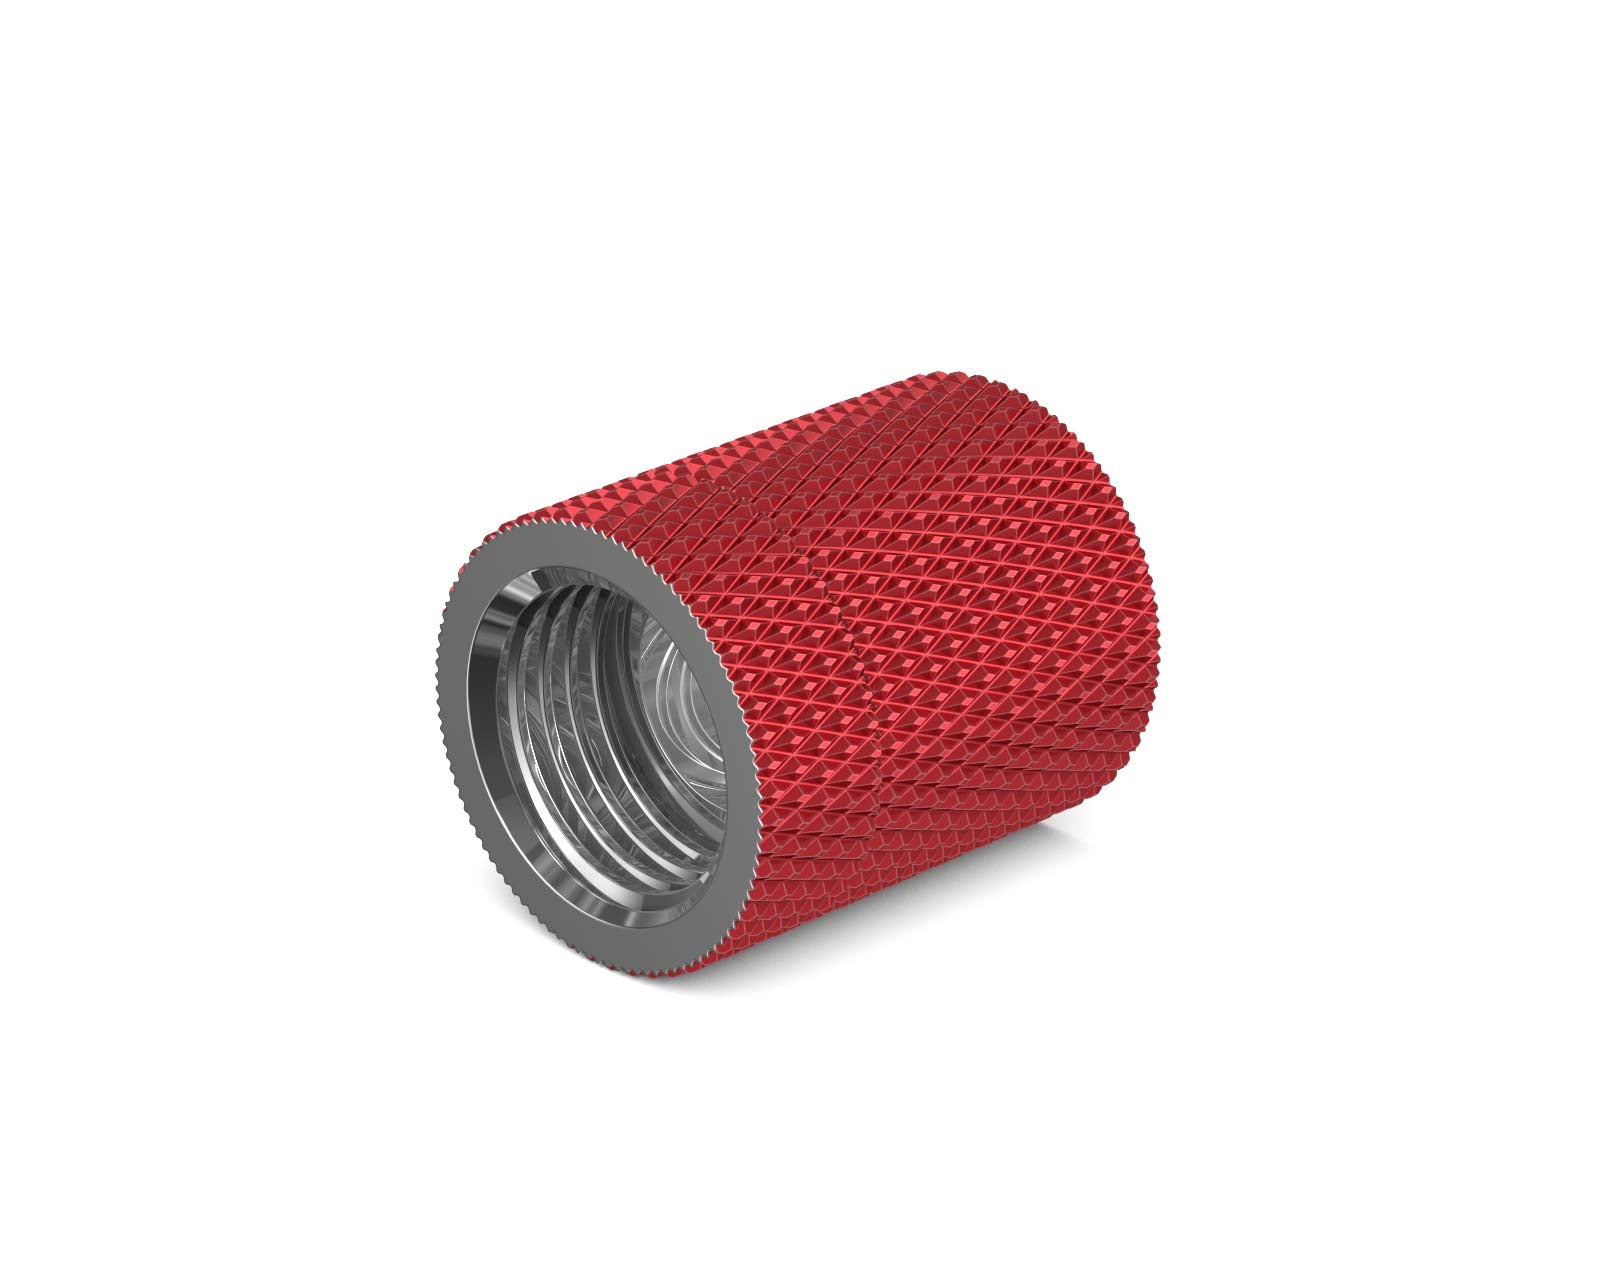 PrimoChill Dual Female G 1/4in. SX Rotary Extension Coupler - PrimoChill - KEEPING IT COOL Candy Red